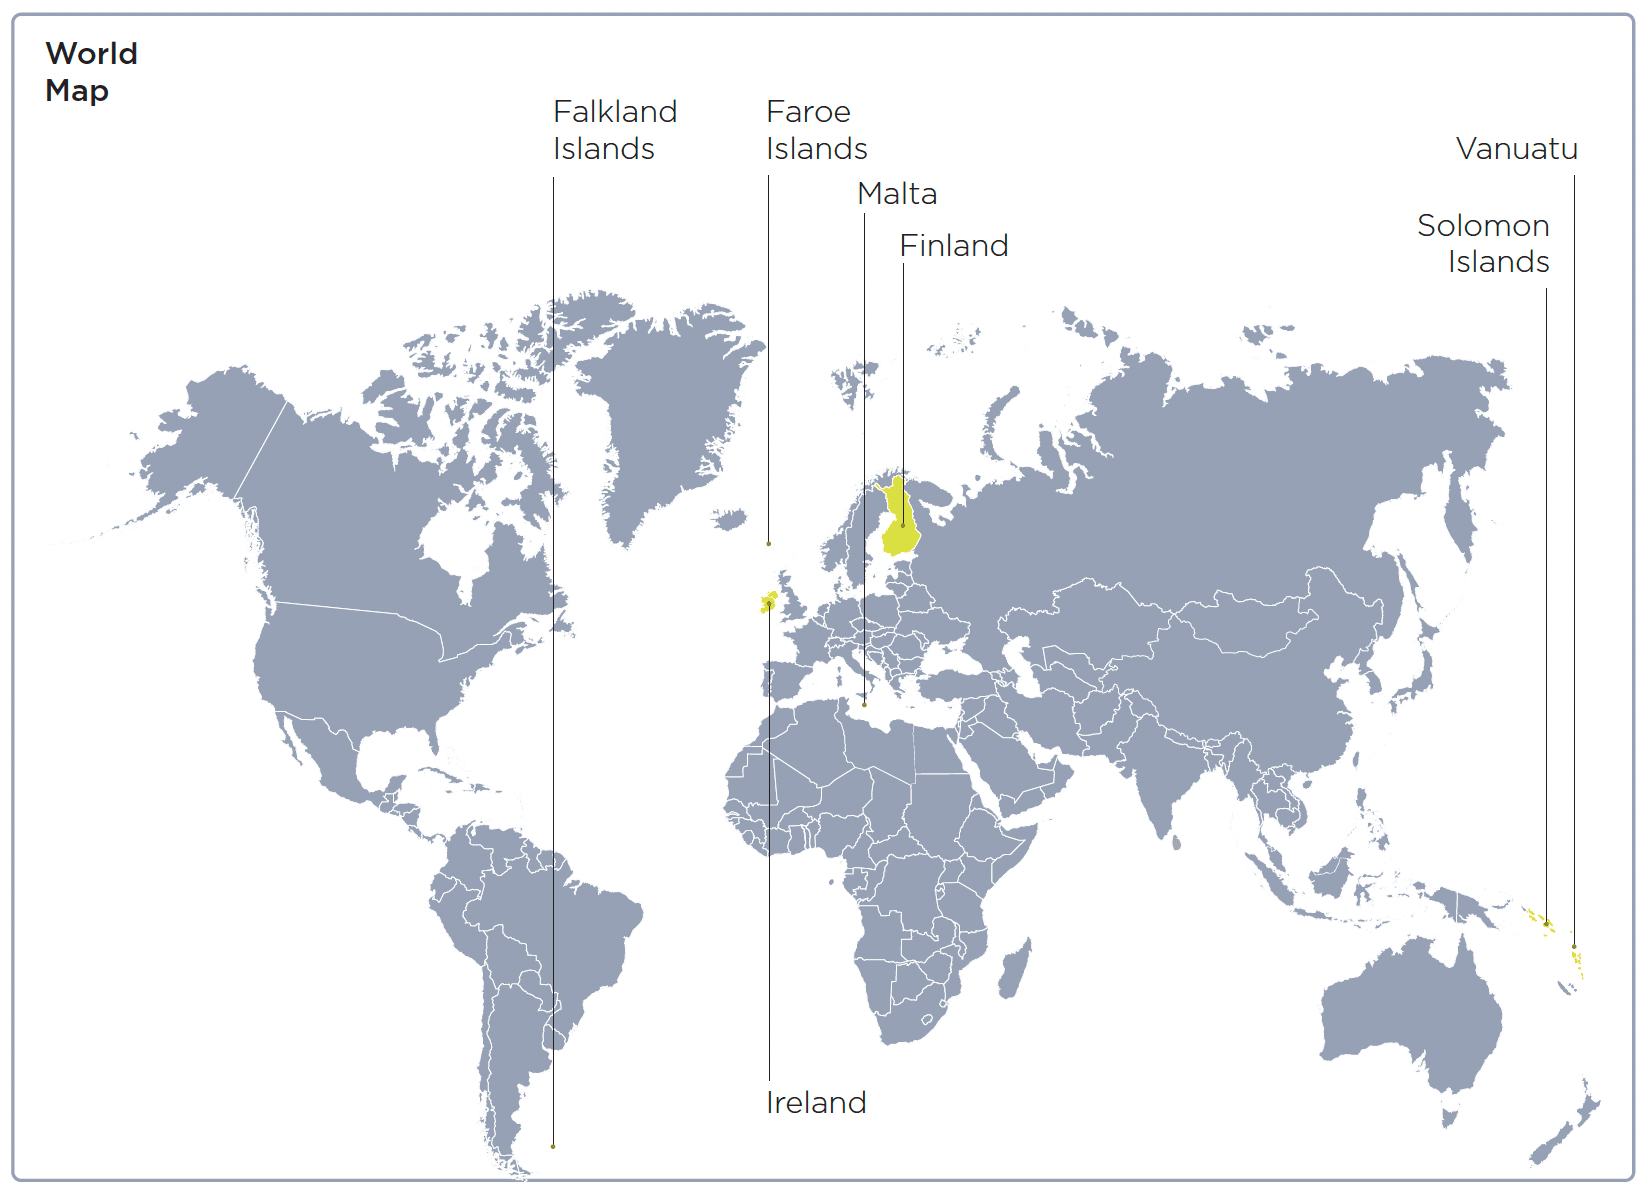 Map showing the locations engaged with as part of the Carbon Neutral Islands Project. Faroe Islands, the Falkland Islands, Ireland, Malta, Finland, Vanuatu and the Solomon Islands.